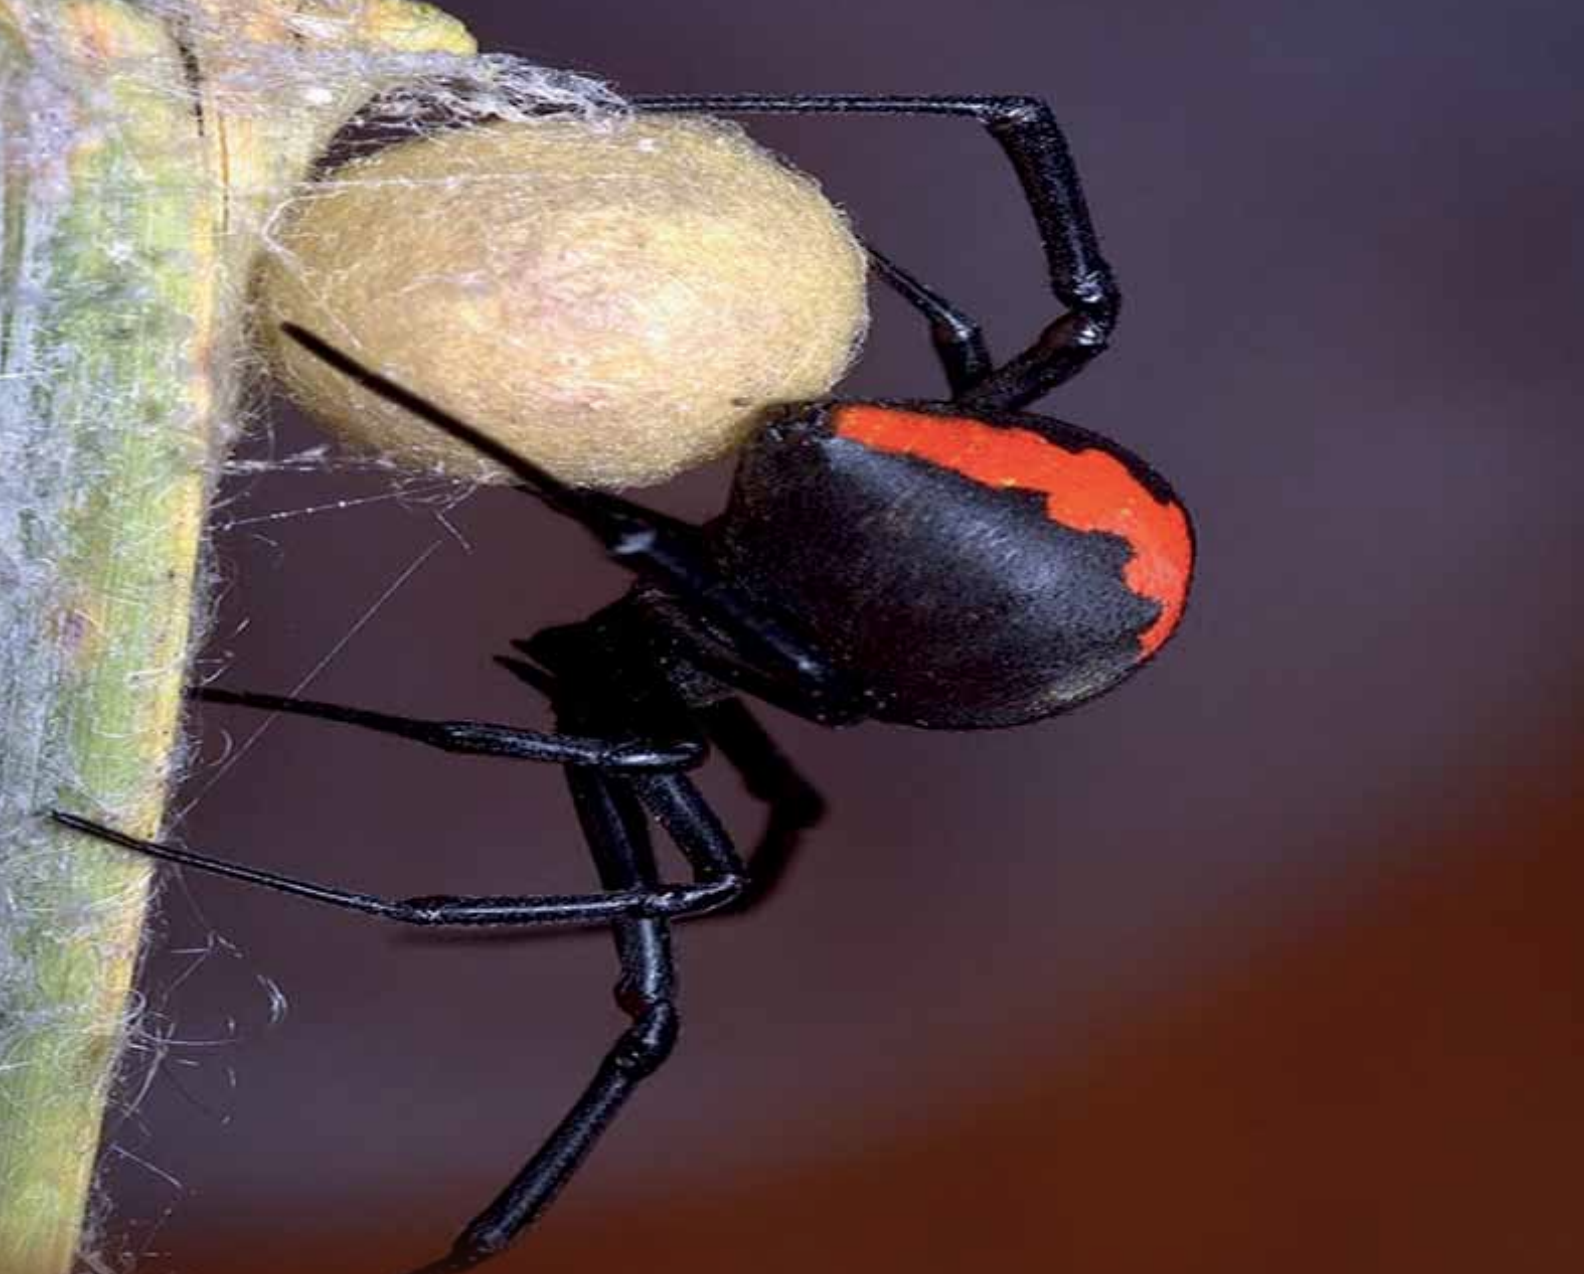 Two species of black widow spider discovered in Sultanate